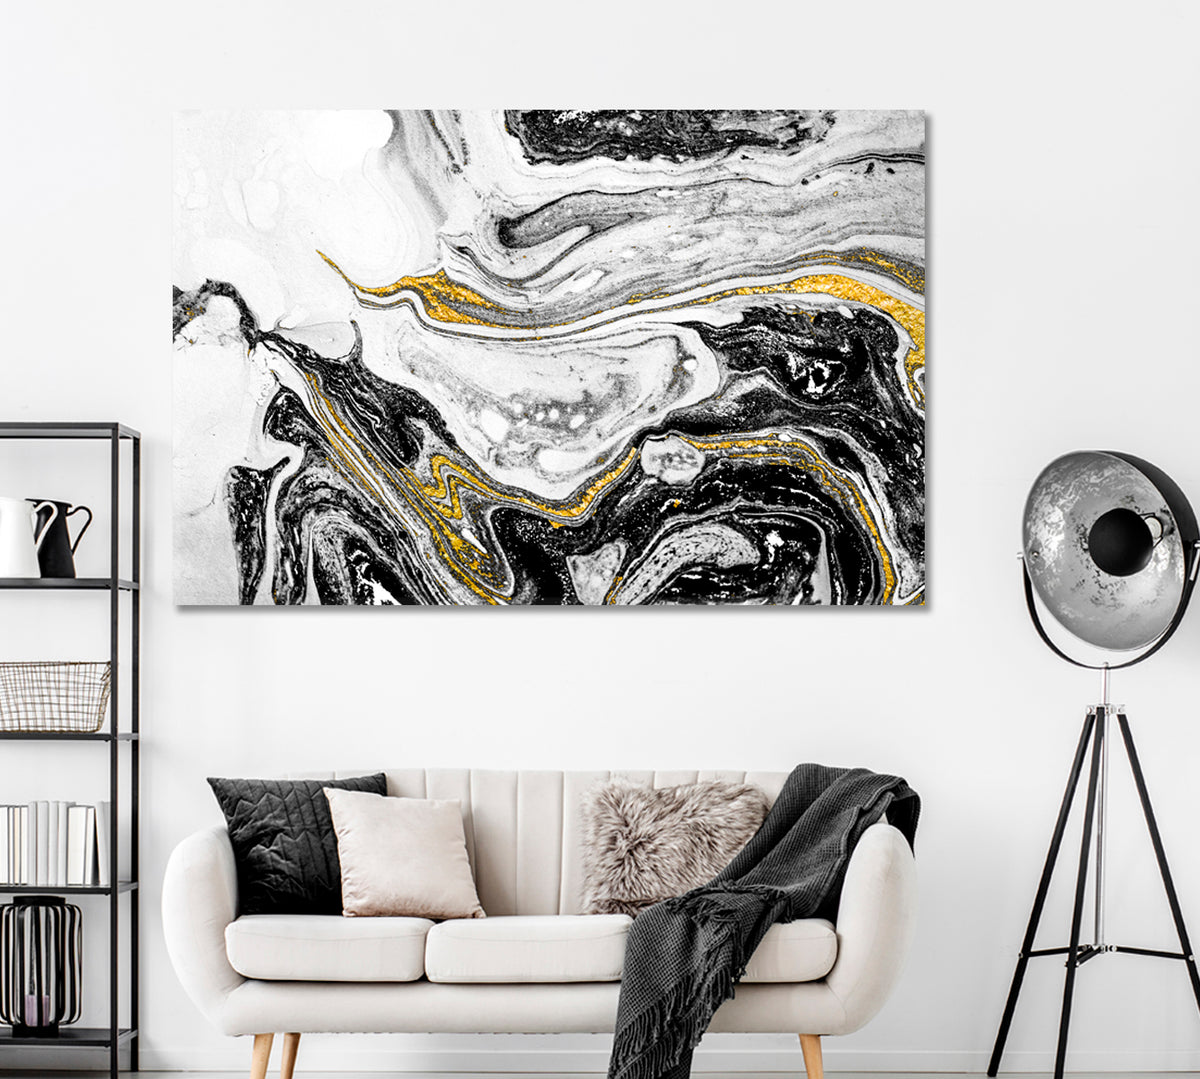 Luxury Black and White Paper Marbling Canvas Print ArtLexy 1 Panel 24"x16" inches 